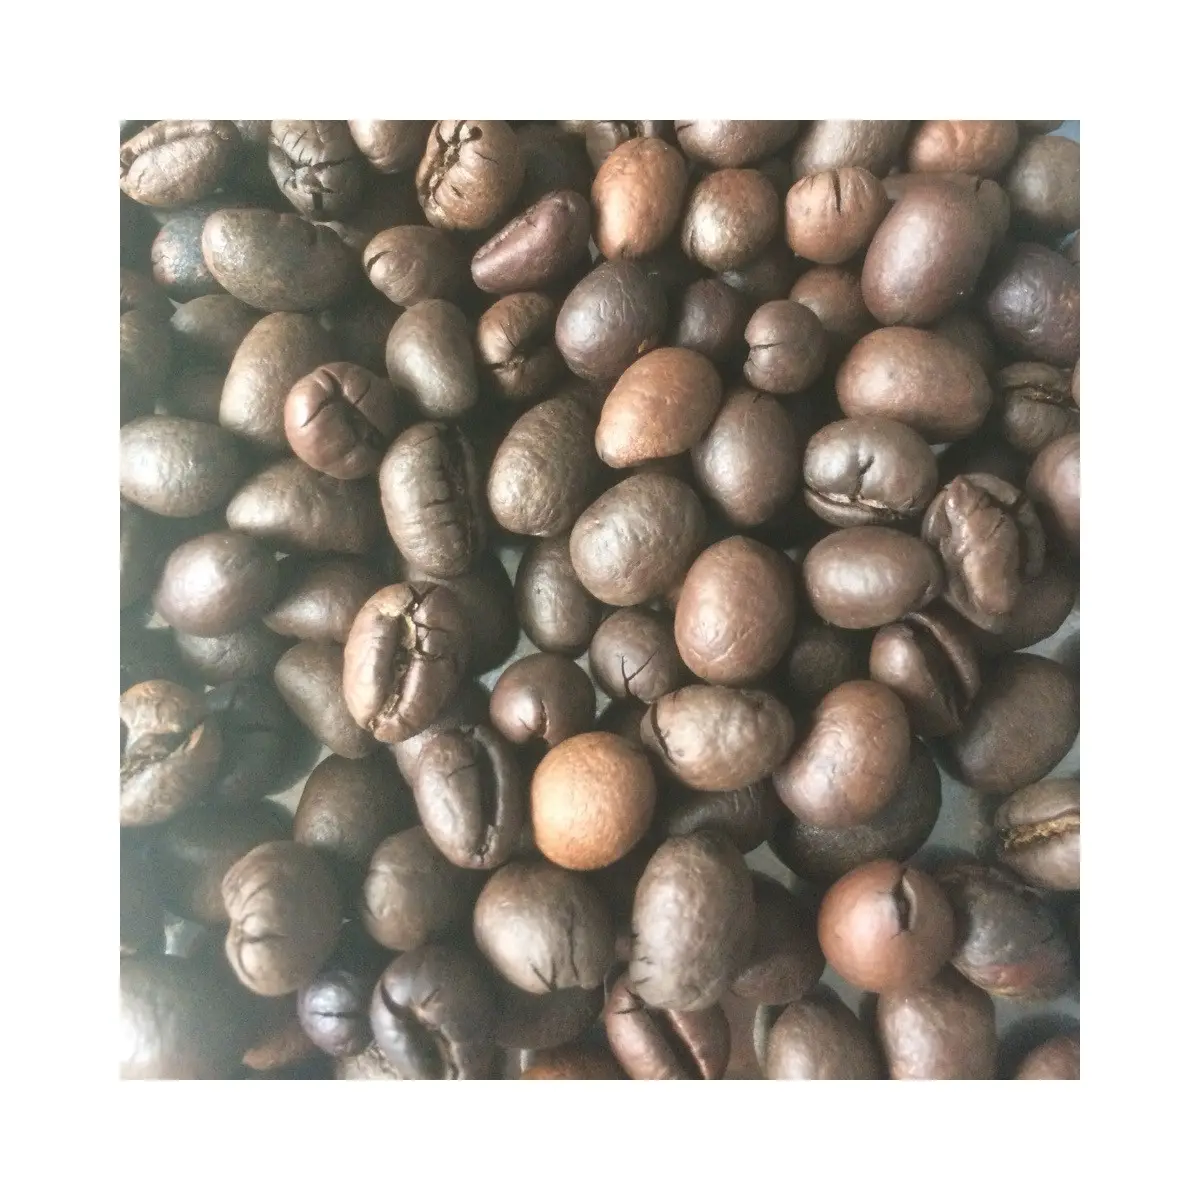 Reasonable Price Roasted Robusta Arabica Coffee Beans Organic Fresh with high quality Dark Pure Flavour